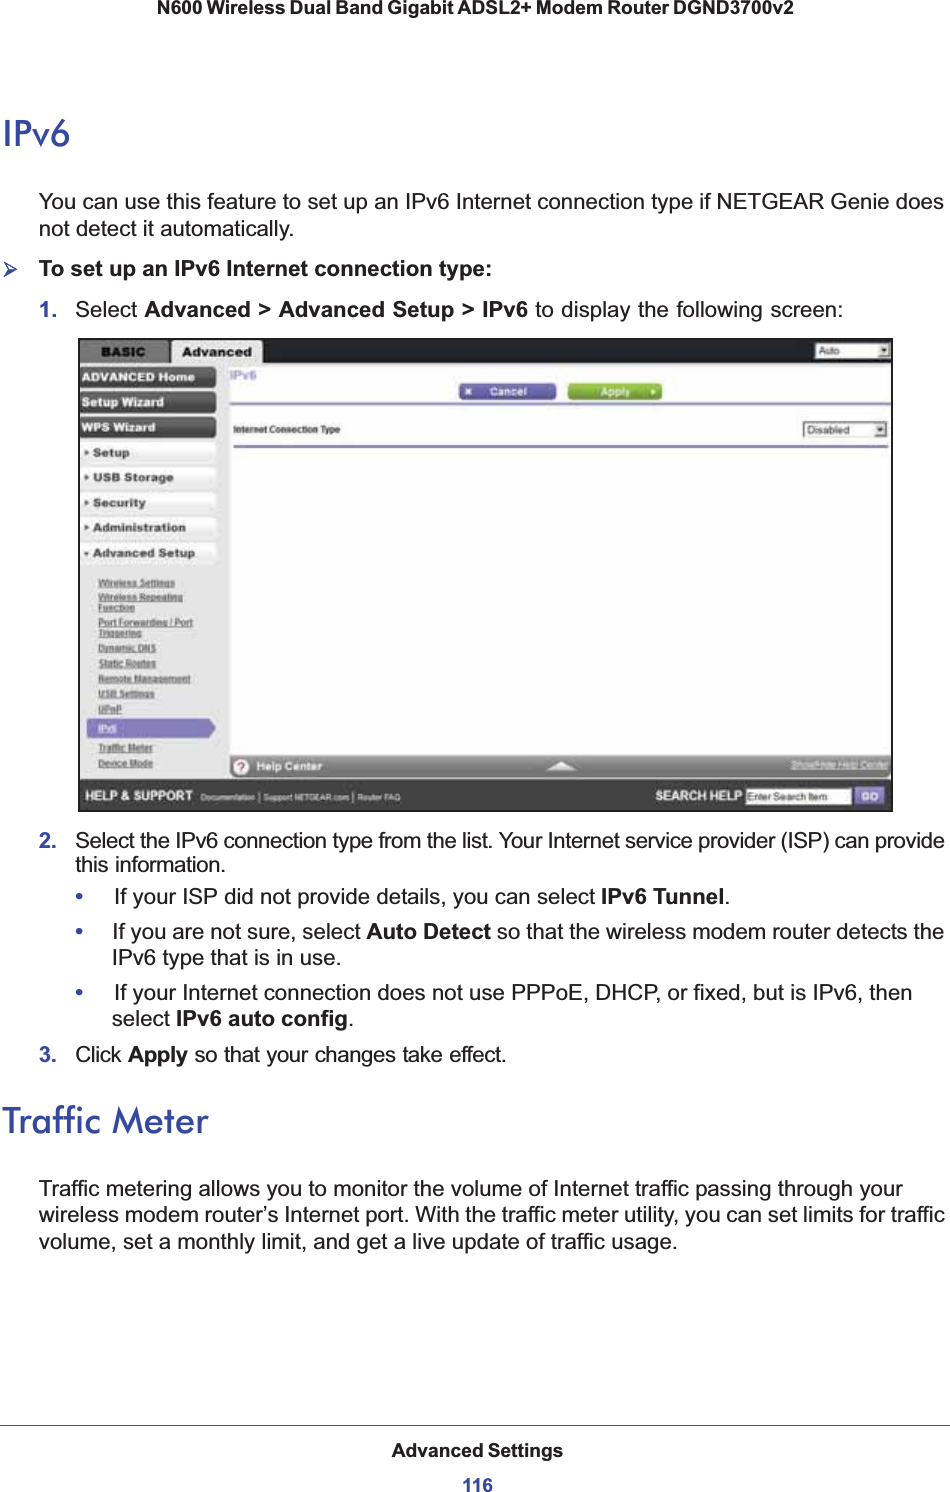 Advanced Settings116N600 Wireless Dual Band Gigabit ADSL2+ Modem Router DGND3700v2 IPv6You can use this feature to set up an IPv6 Internet connection type if NETGEAR Genie does not detect it automatically.¾To set up an IPv6 Internet connection type:1. Select Advanced &gt; Advanced Setup &gt; IPv6 to display the following screen:2.  Select the IPv6 connection type from the list. Your Internet service provider (ISP) can provide this information.•If your ISP did not provide details, you can select IPv6 Tunnel.•     If you are not sure, select Auto Detect so that the wireless modem router detects the IPv6 type that is in use.•If your Internet connection does not use PPPoE, DHCP, or fixed, but is IPv6, then select IPv6 auto config.3.  Click Apply so that your changes take effect.Traffic MeterTraffic metering allows you to monitor the volume of Internet traffic passing through your wireless modem router’s Internet port. With the traffic meter utility, you can set limits for traffic volume, set a monthly limit, and get a live update of traffic usage.